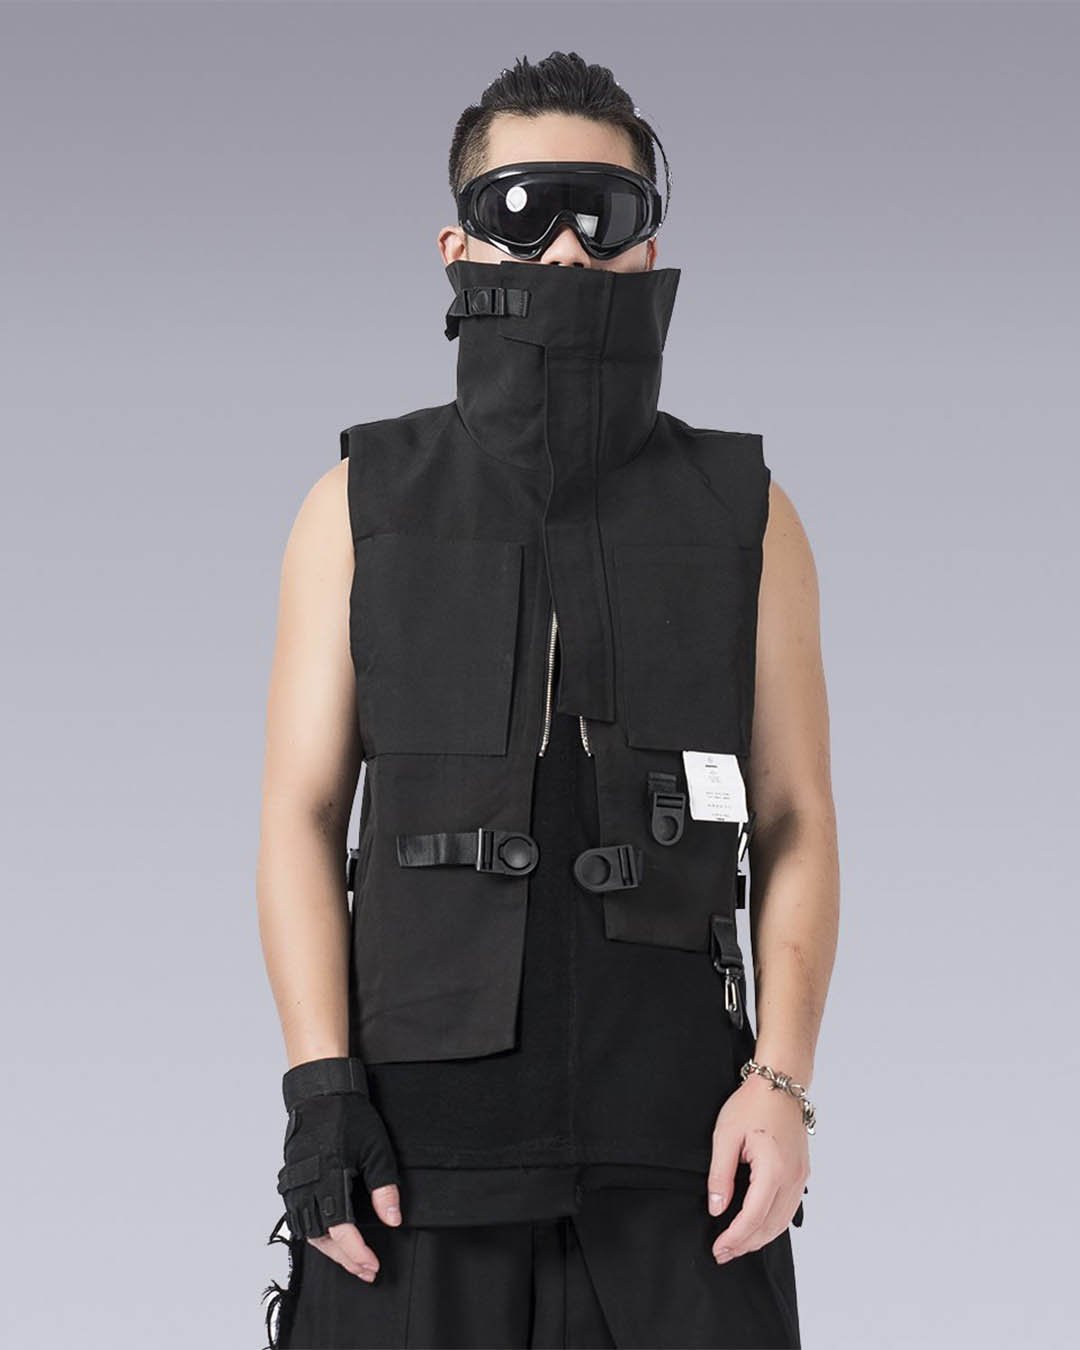 Techwear Vests & Tactical Fashion | Modern Function Meets Style – Imaphotic